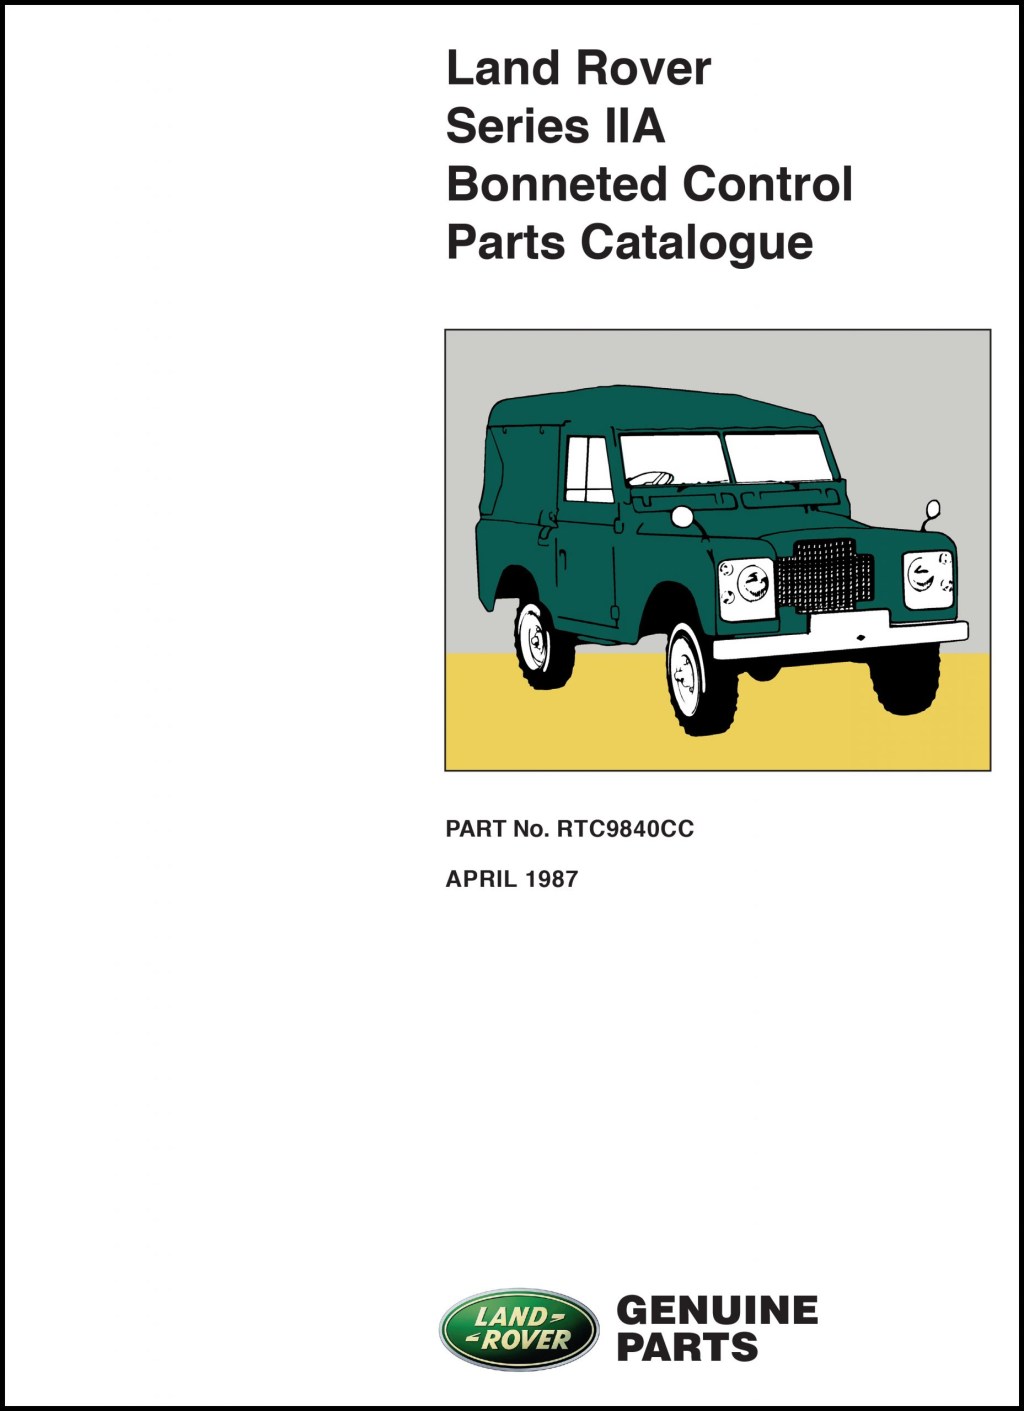 Picture of: Land Rover , Series A Bonneted Control , Parts Catalogue